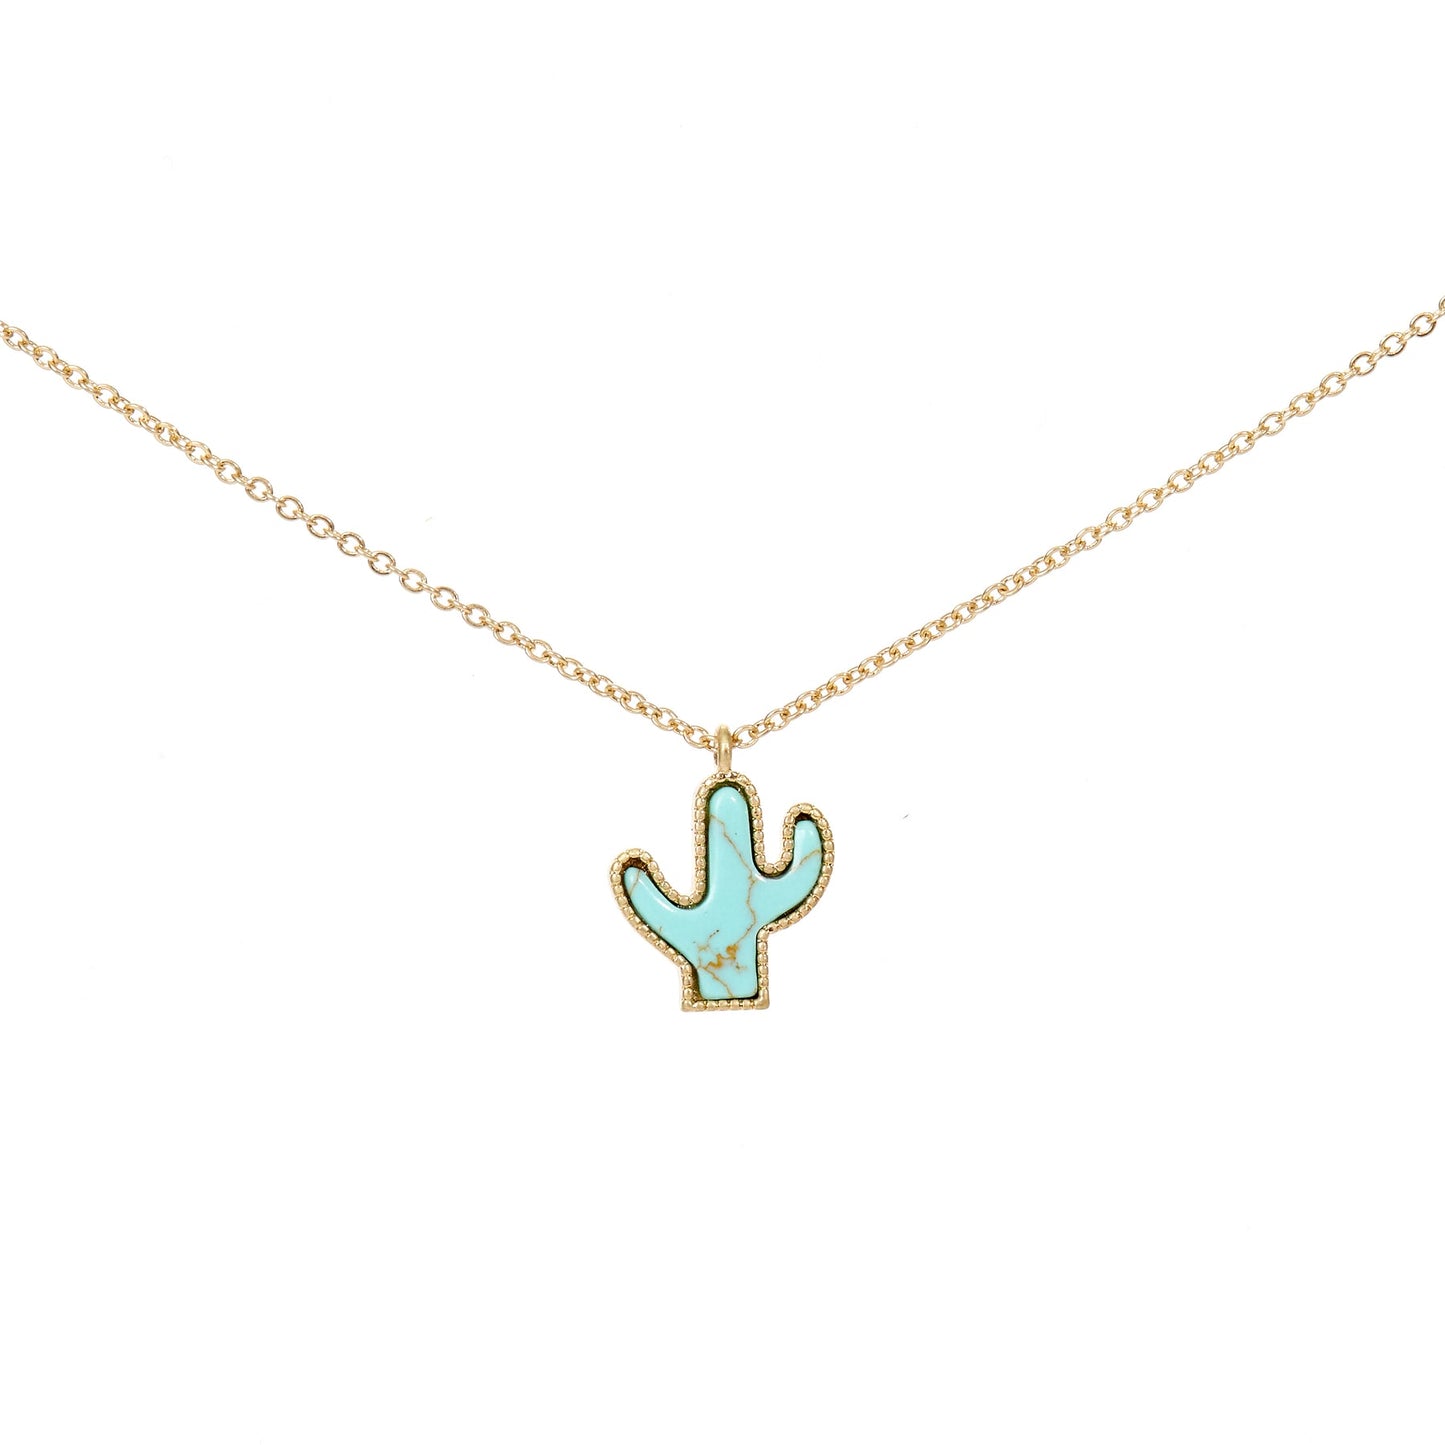 Charm Necklaces by Clover Lane - gift jewelry necklace